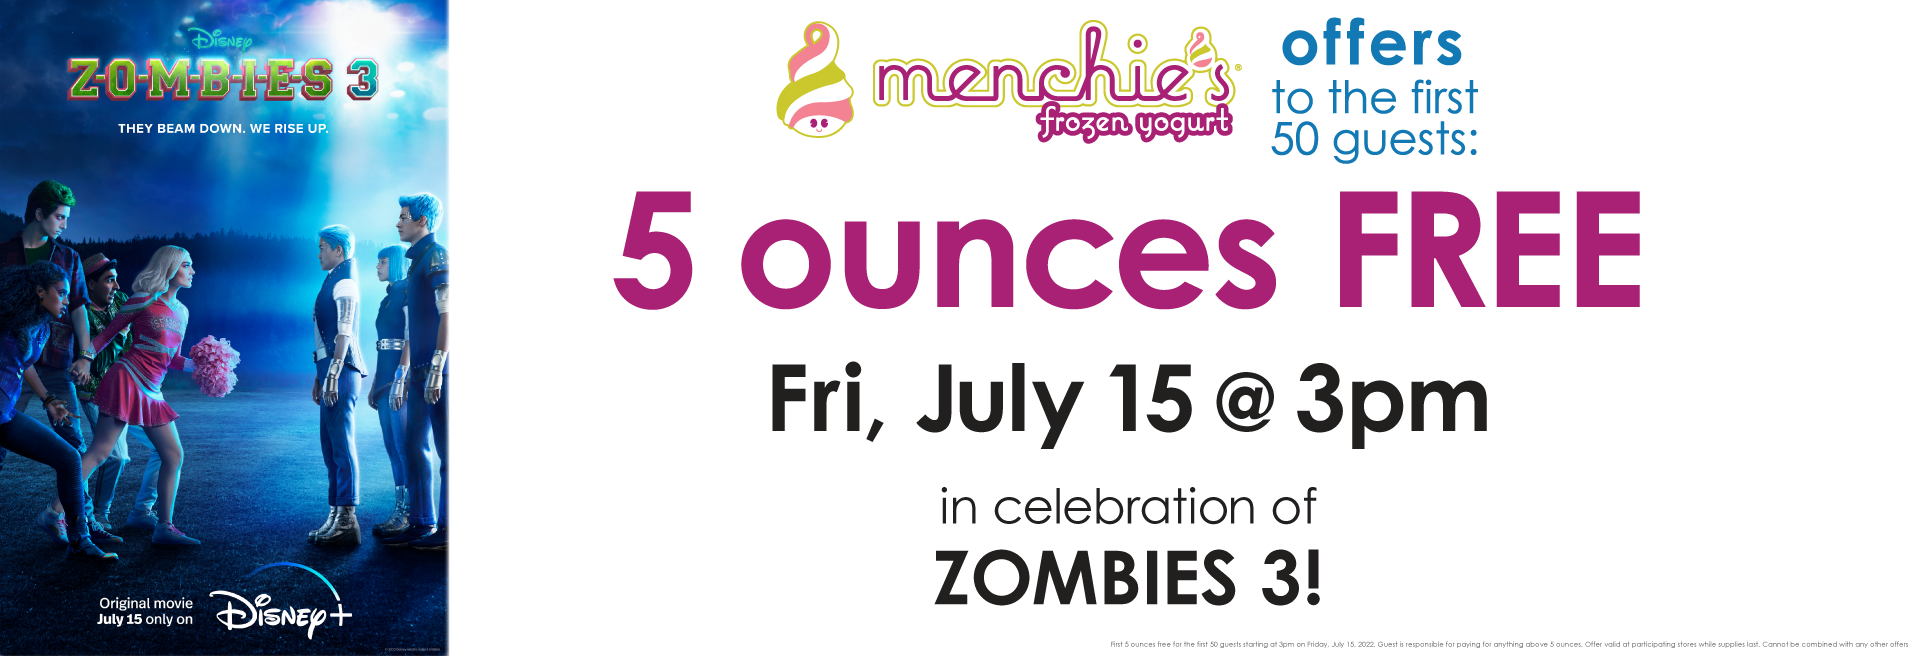 Visit Menchie’s Friday, July 15th for FREE froyo!